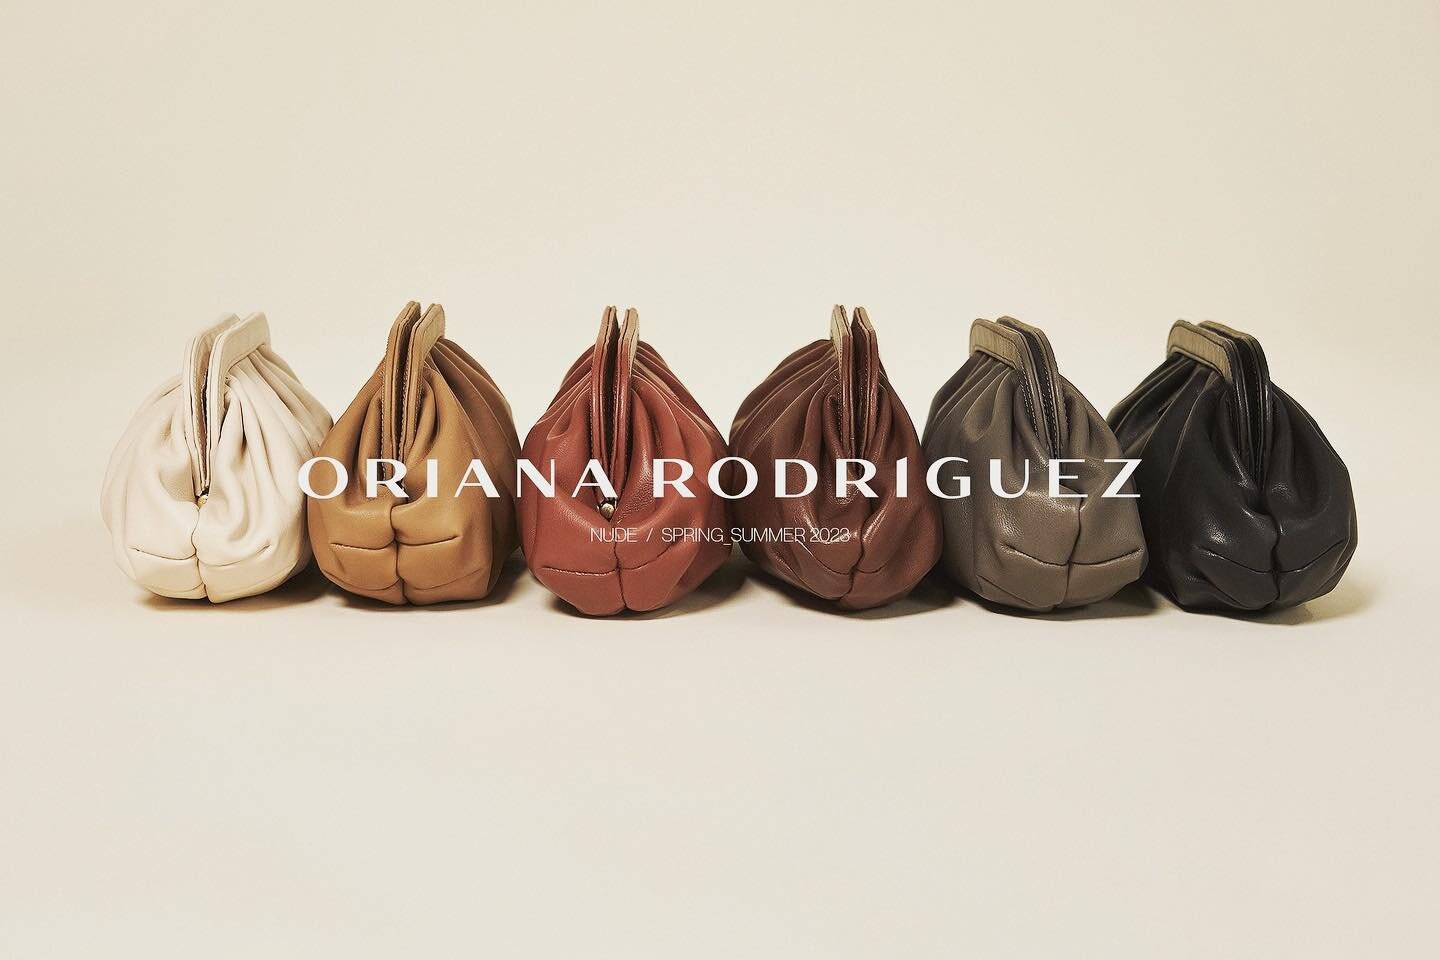 This Cinco de Mayo, Shopboy presents Oriana Rodriguez, in partnership with LALO Tequila. 

Join us for a happy hour at Shopboy this Friday, May 5th from 4pm-7pm to shop @orianarodriguez_handbags newest collection and enjoy margaritas and mules by @la